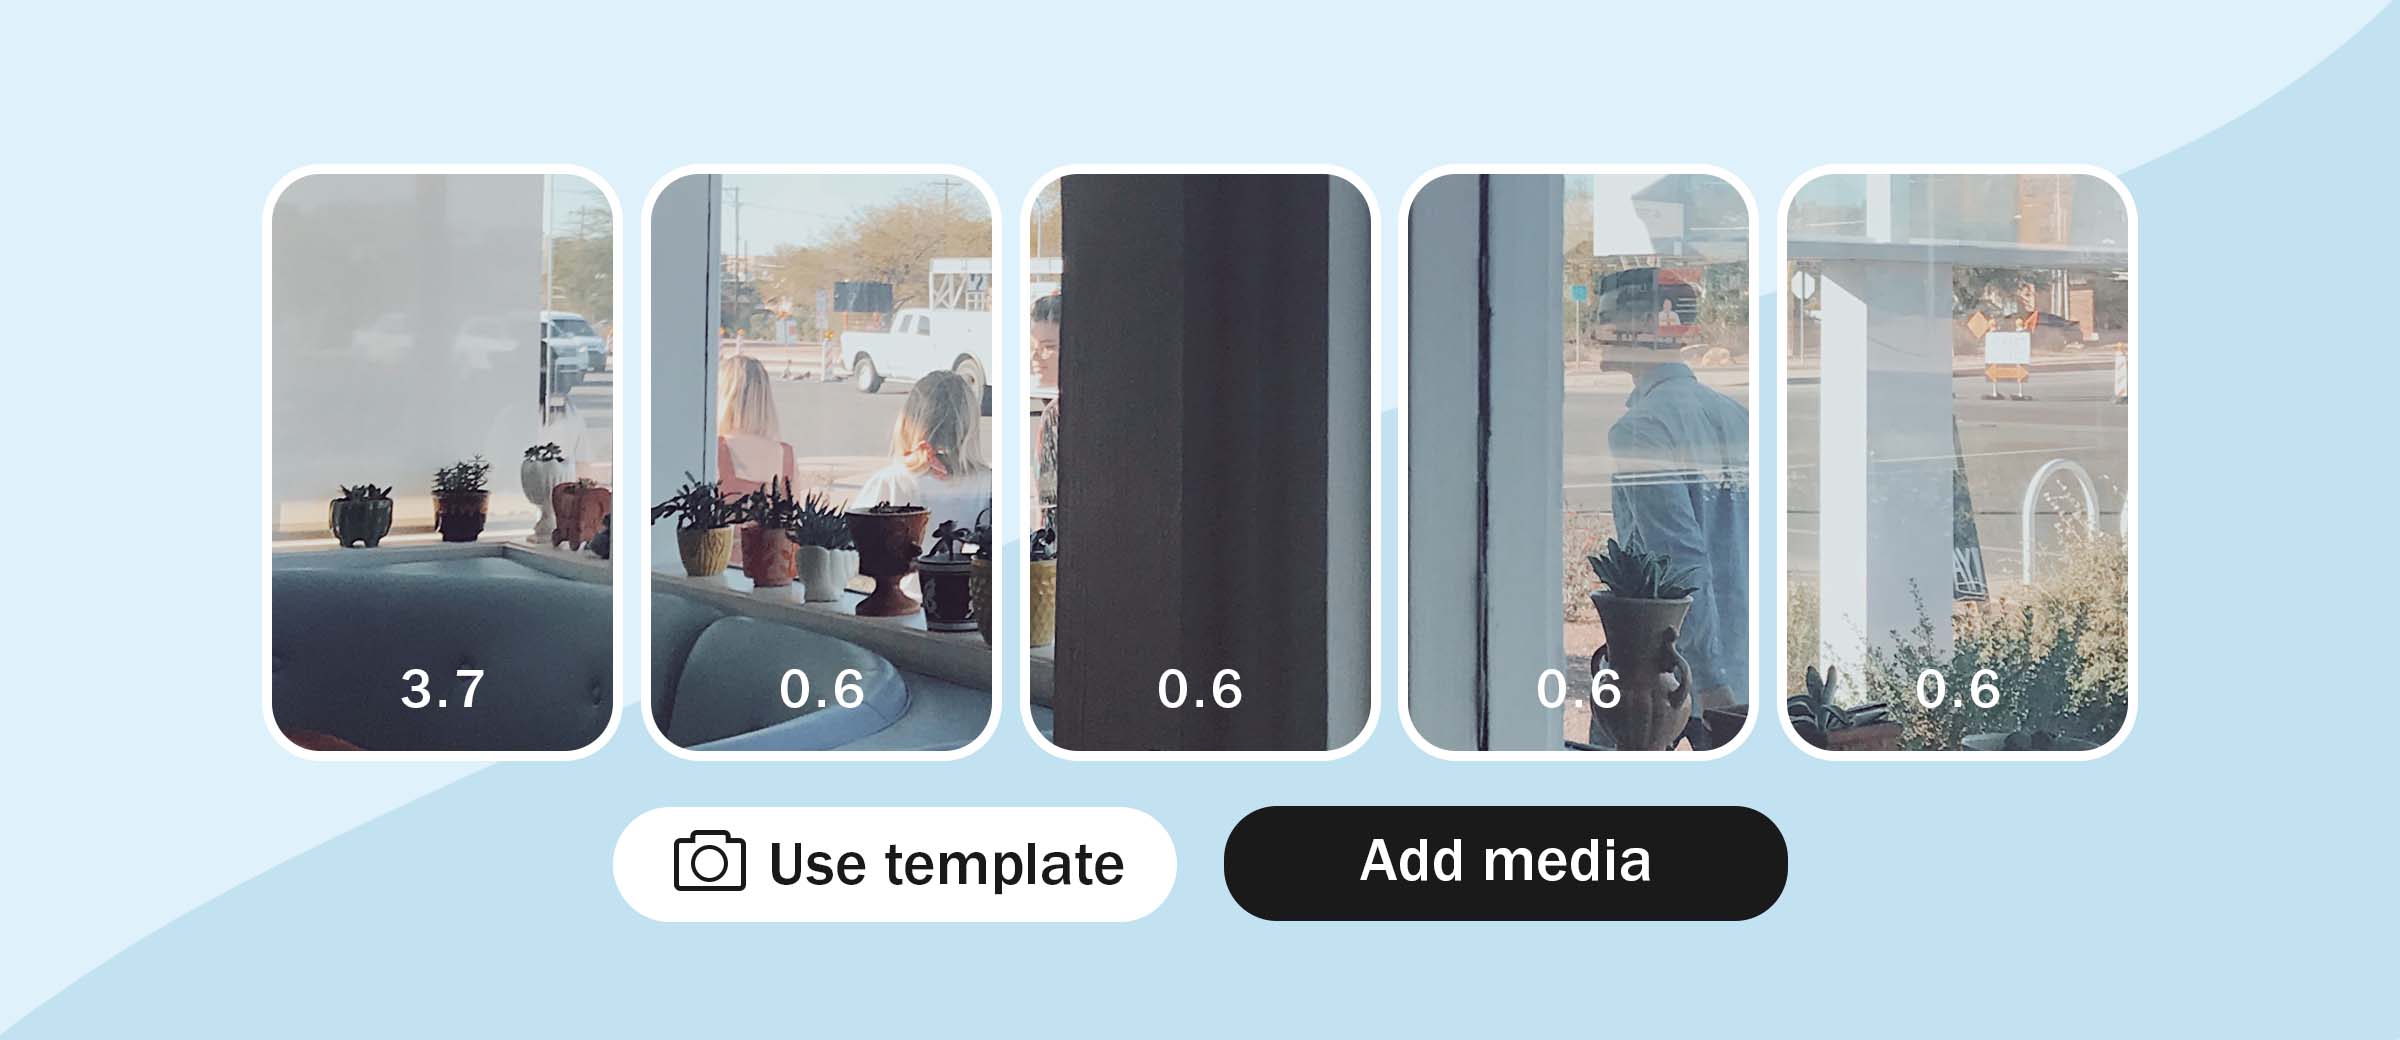 Instagram Reels Templates: How to Use This New Feature, by danielle-townsley